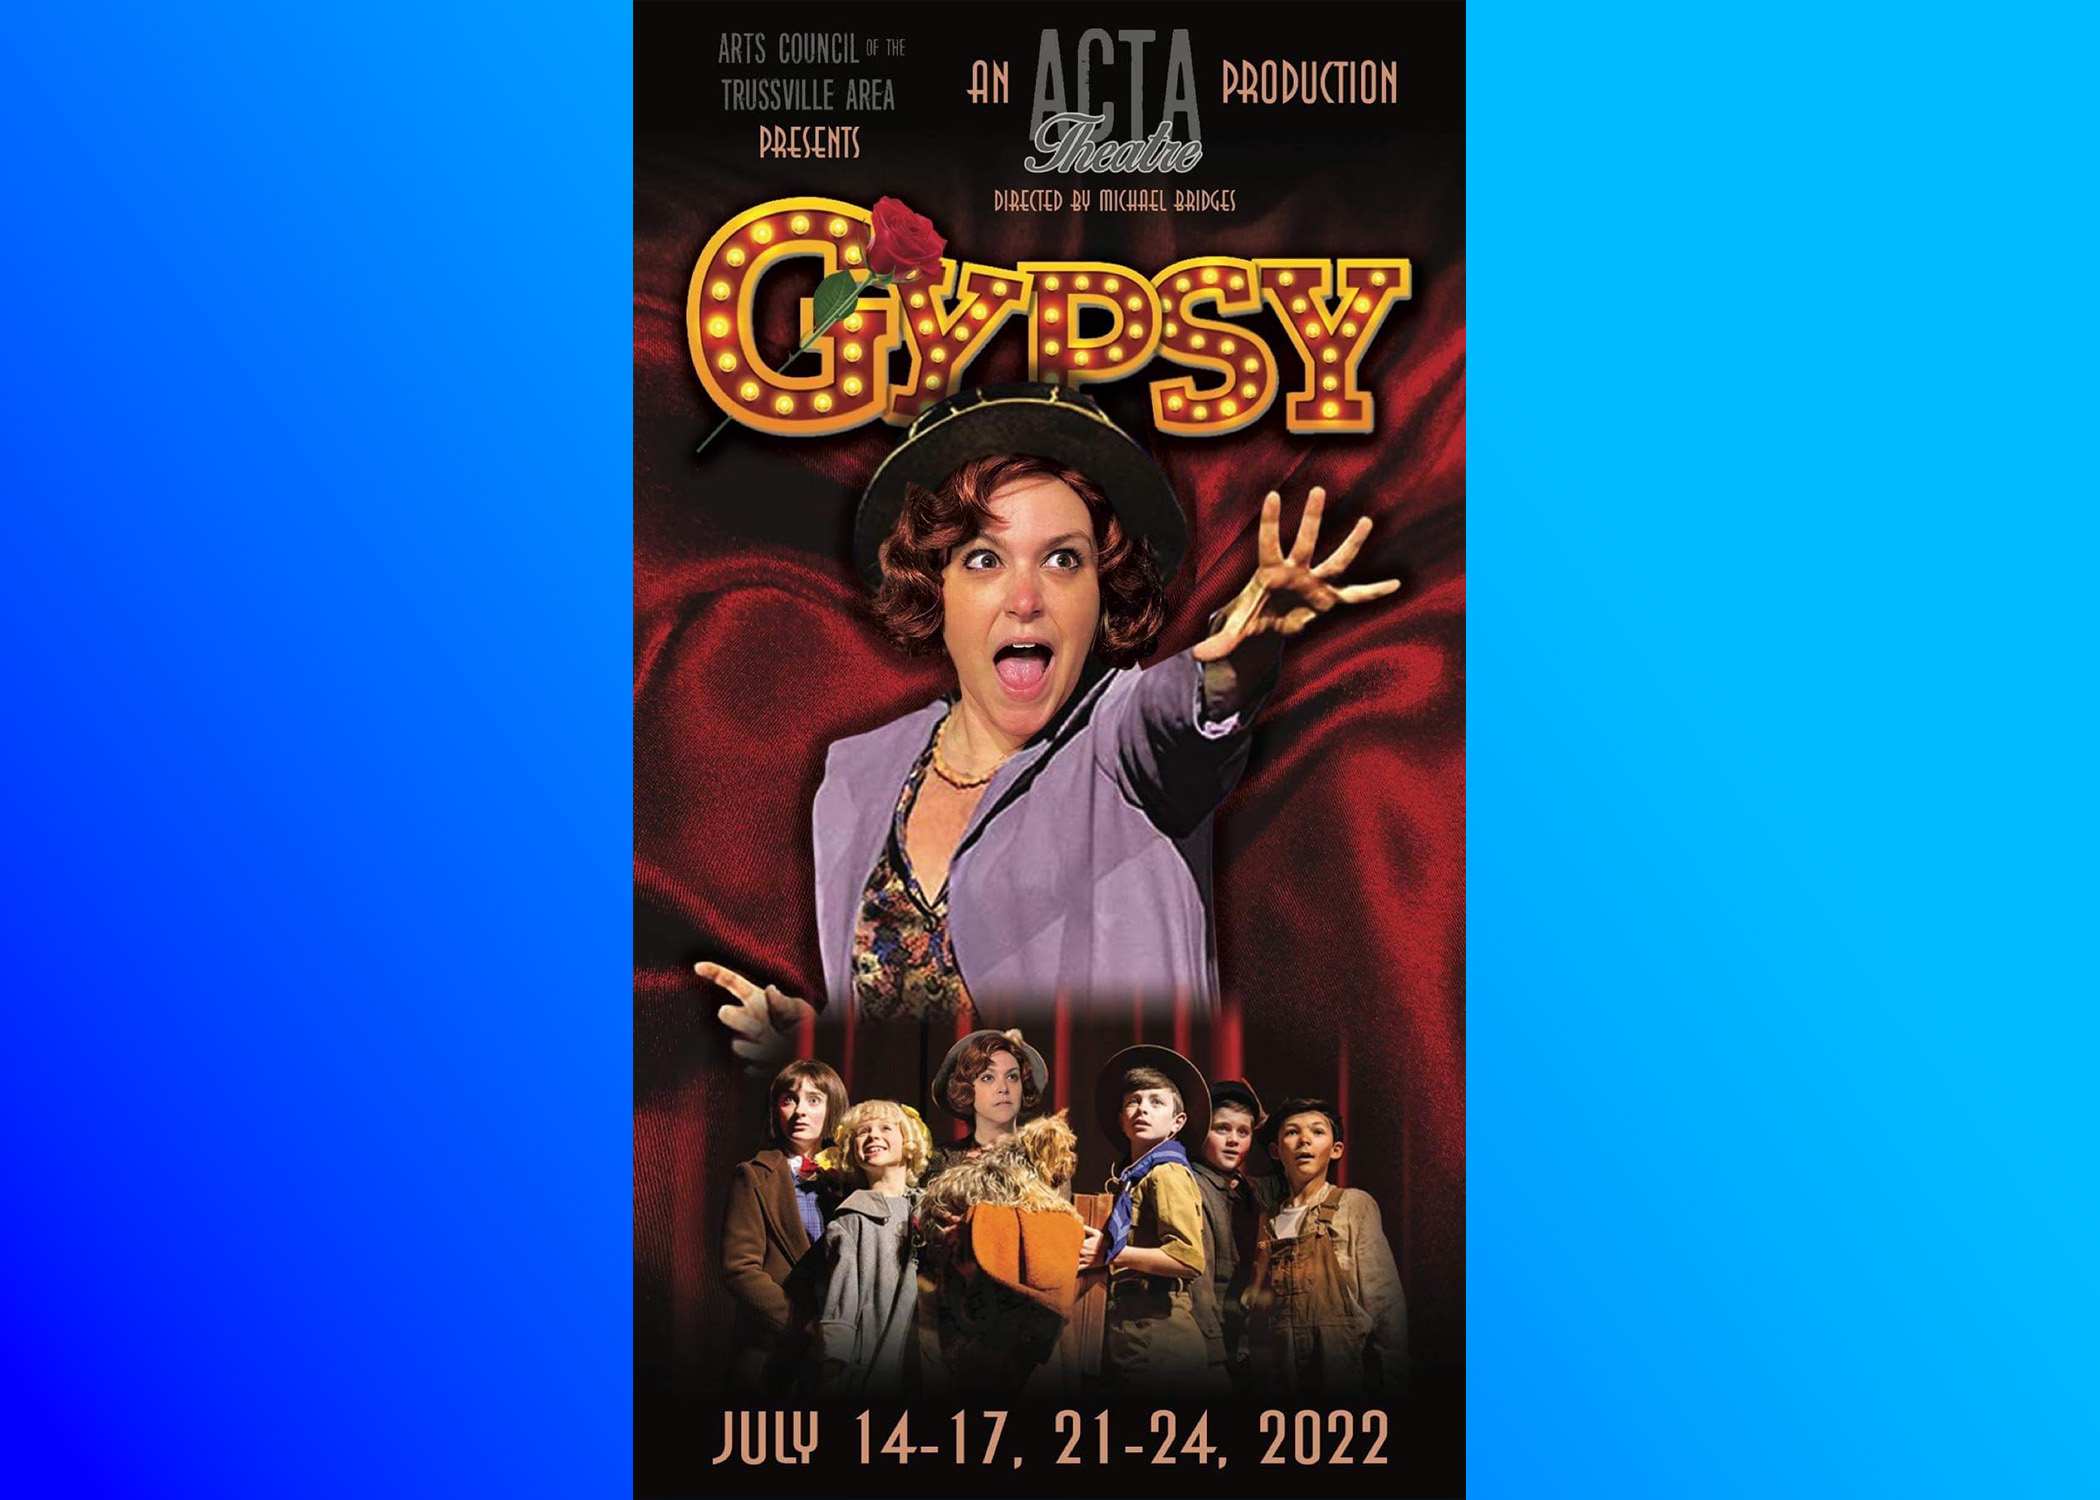 ACTA Theatre presents Gypsy - A Musical Fable